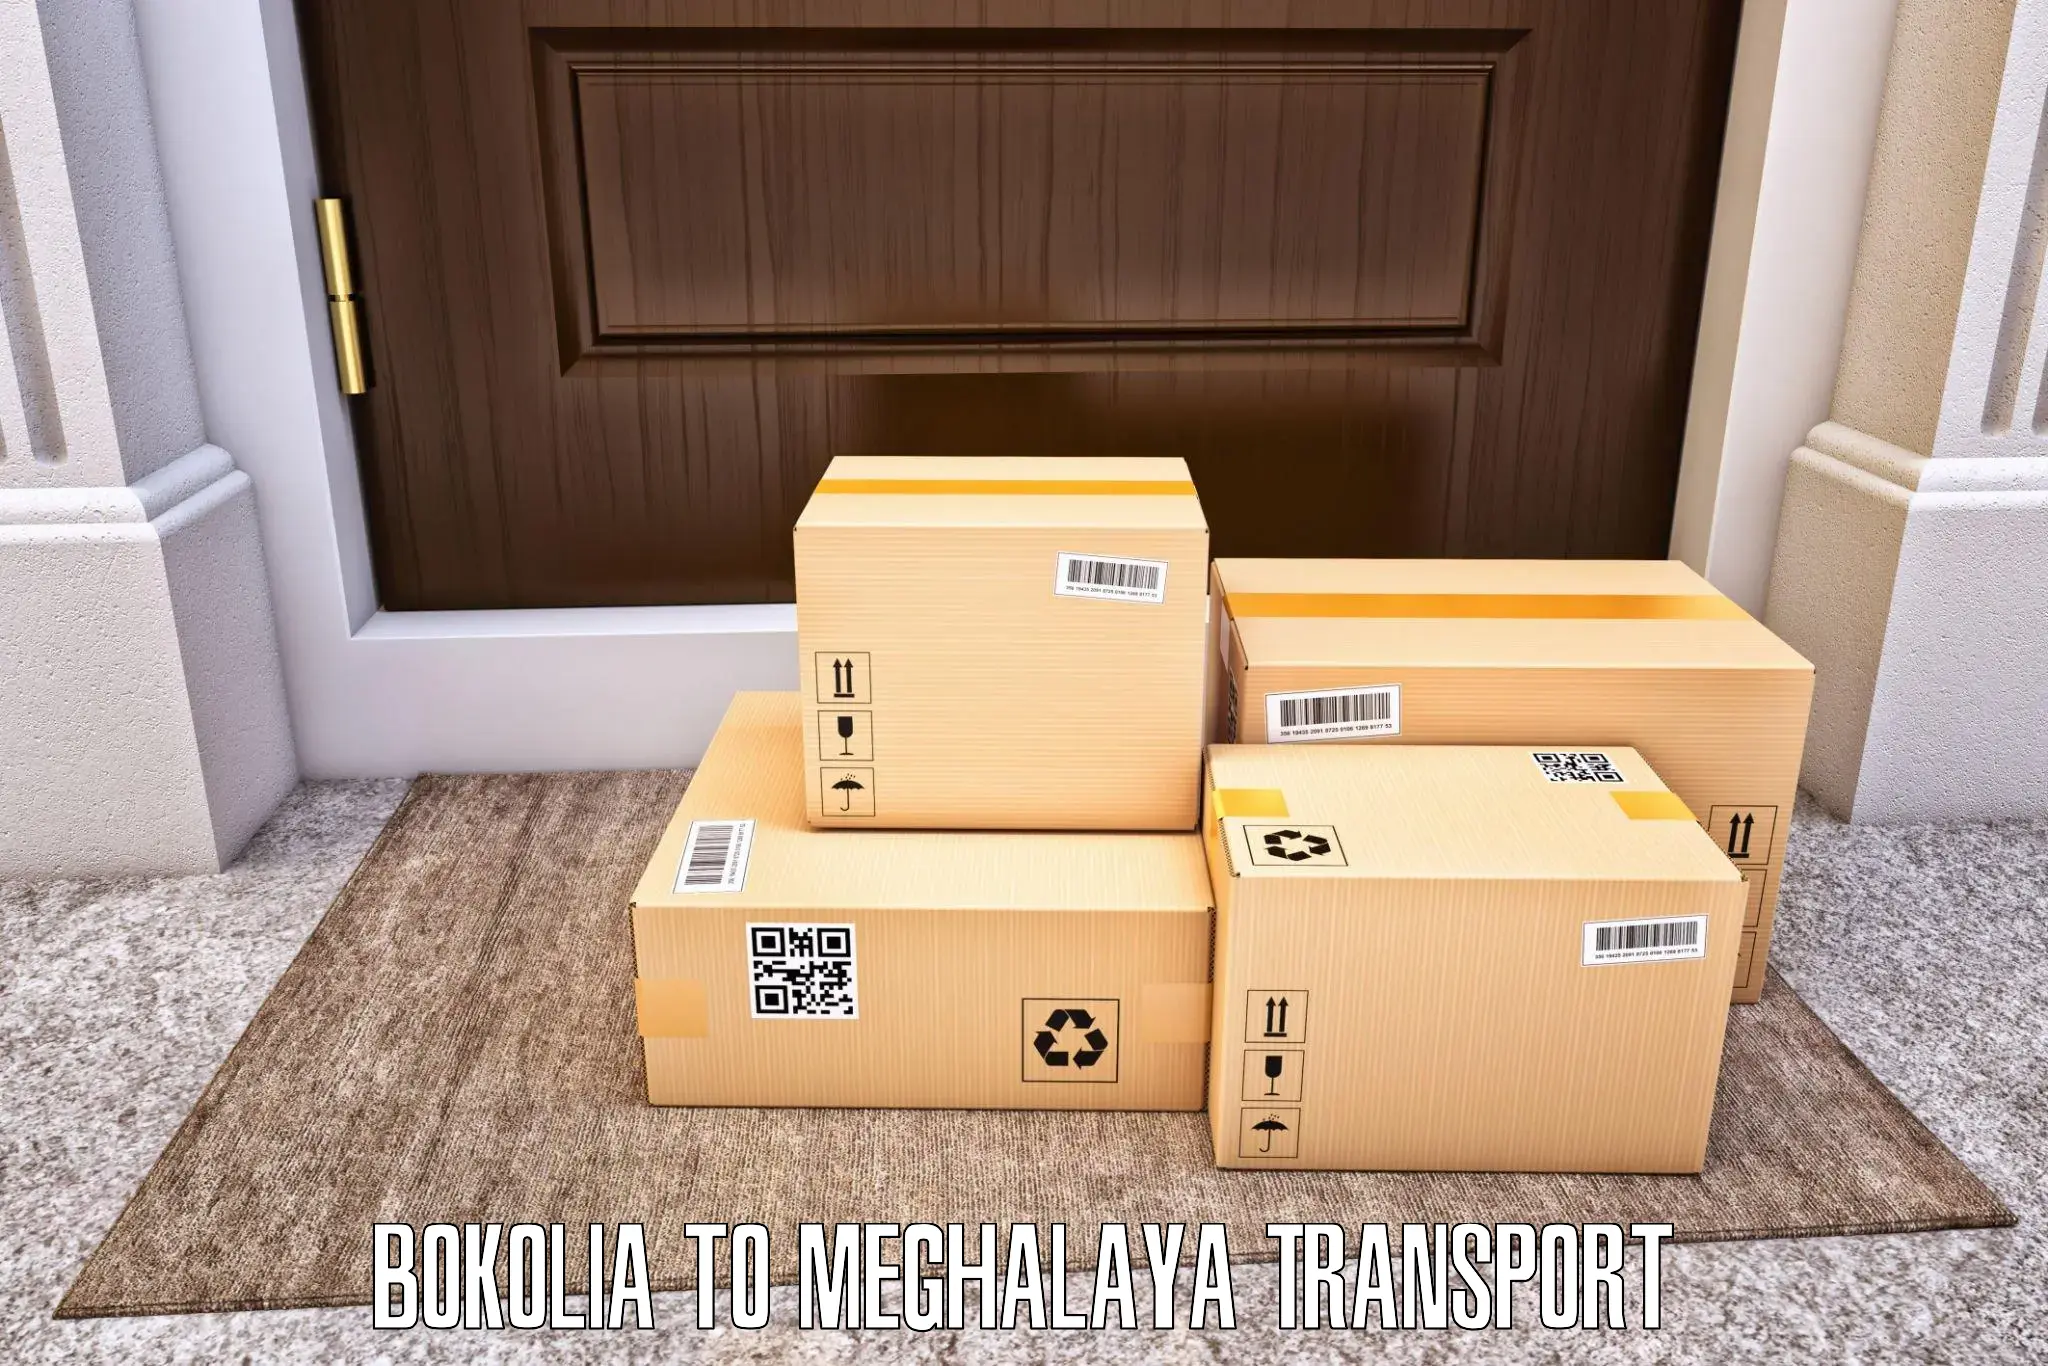 Daily transport service Bokolia to Dkhiah West